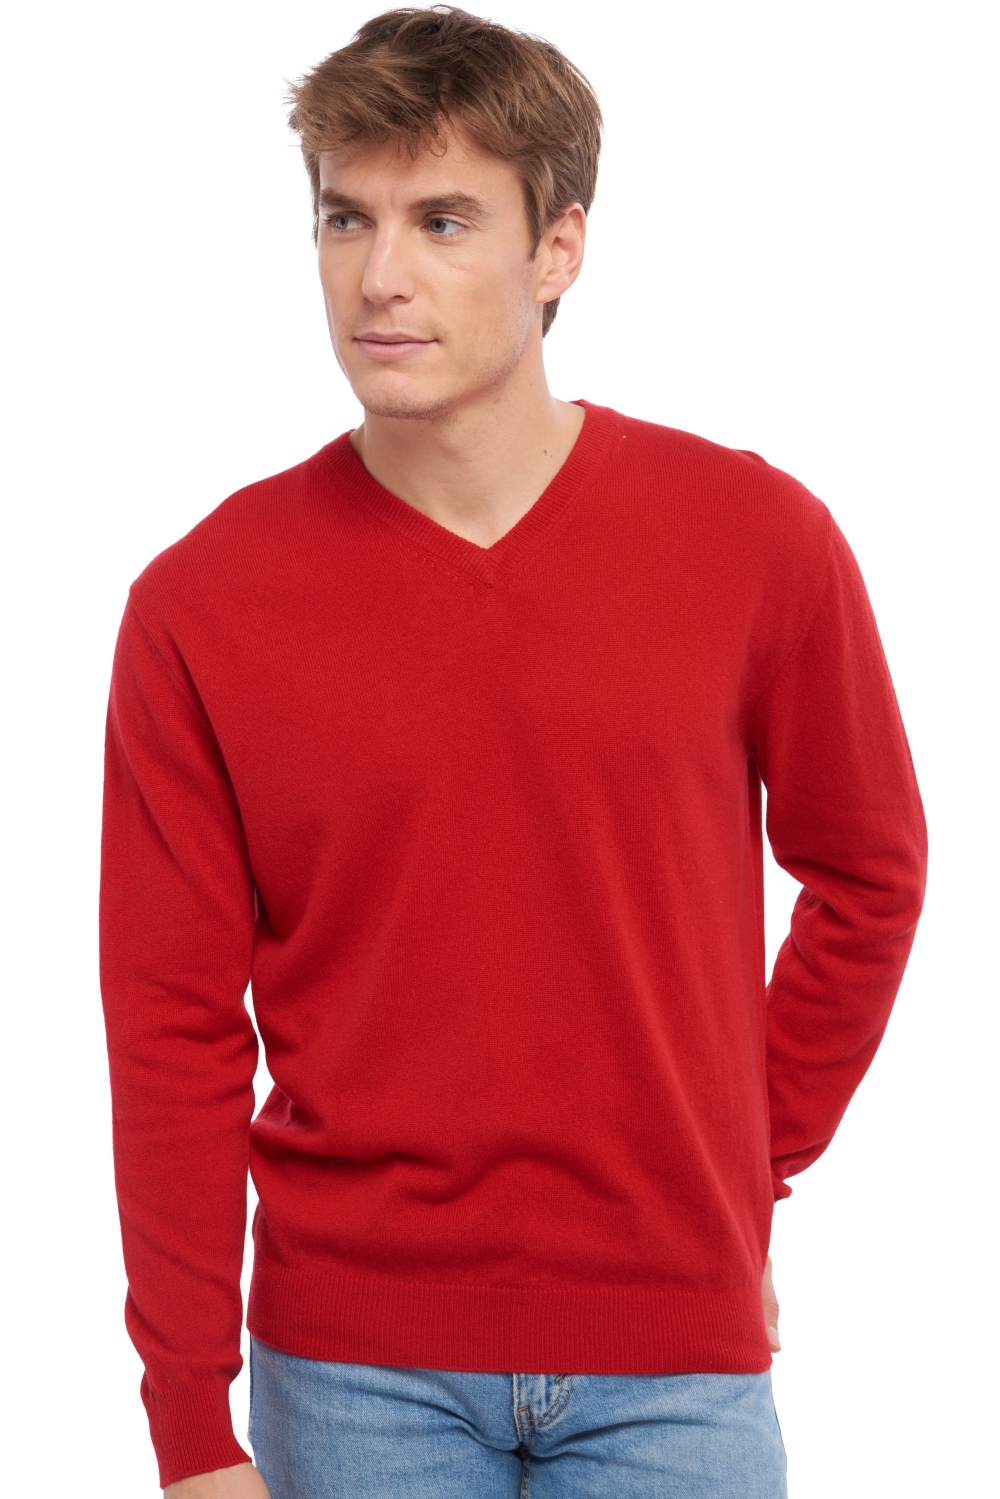 Cashmere men timeless classics gaspard blood red s